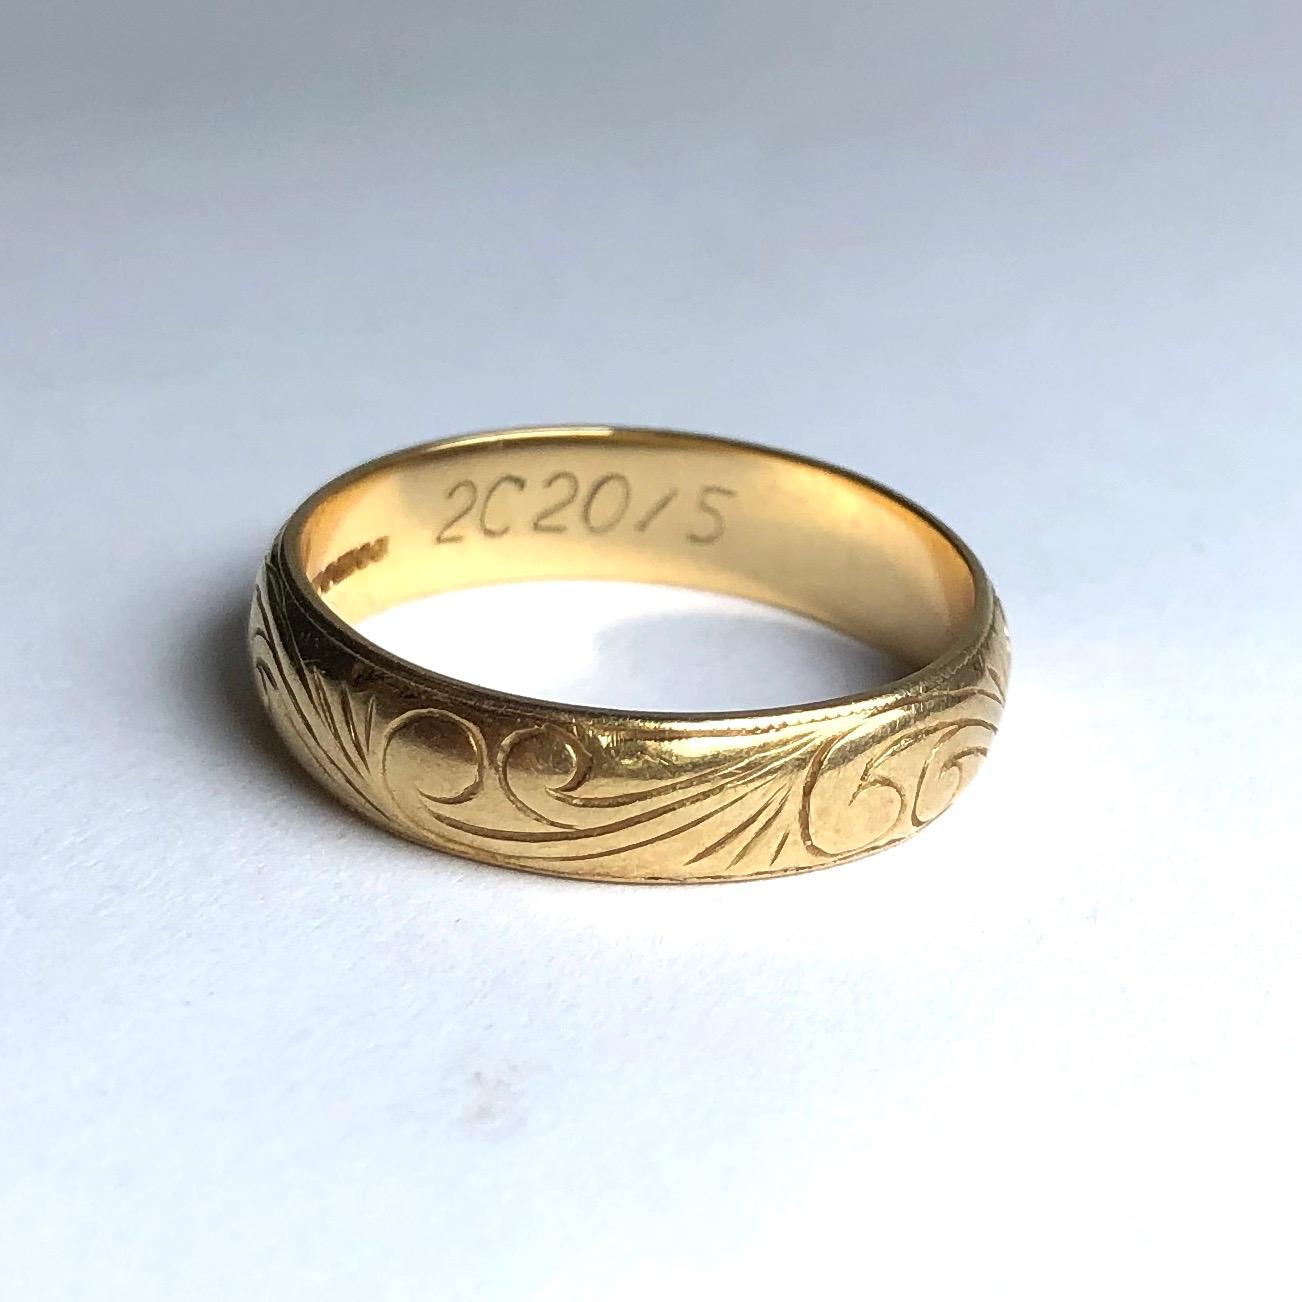 The 18carat gold band has fine scroll engraving and either side of the band there is a fine line framing the engraving. 

Ring Size: P 1/2 or 7 3/4
Band Width: 5mm 

Weight: 4.5g